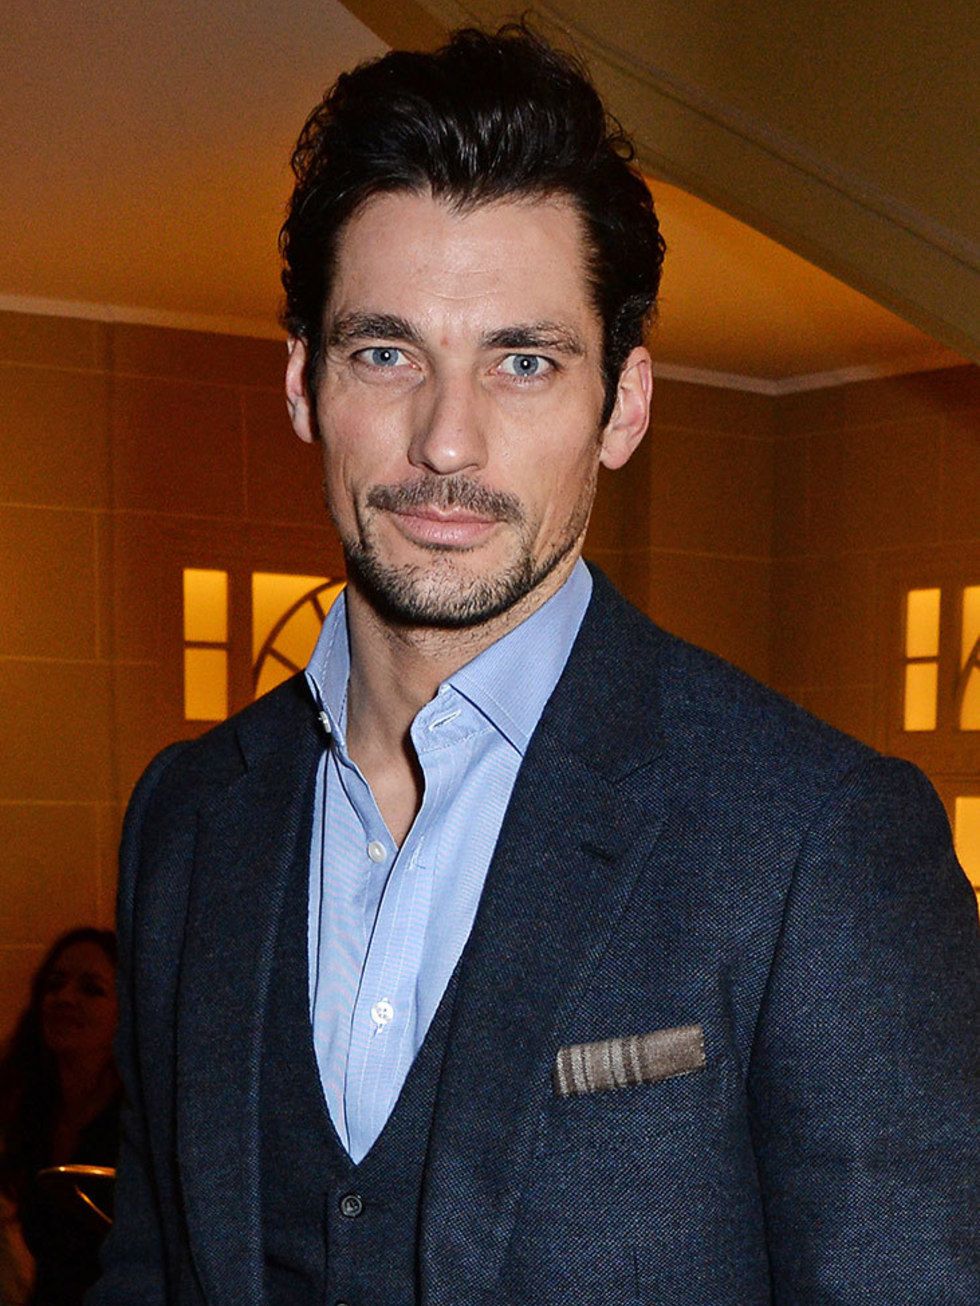 Pictures of David Gandy